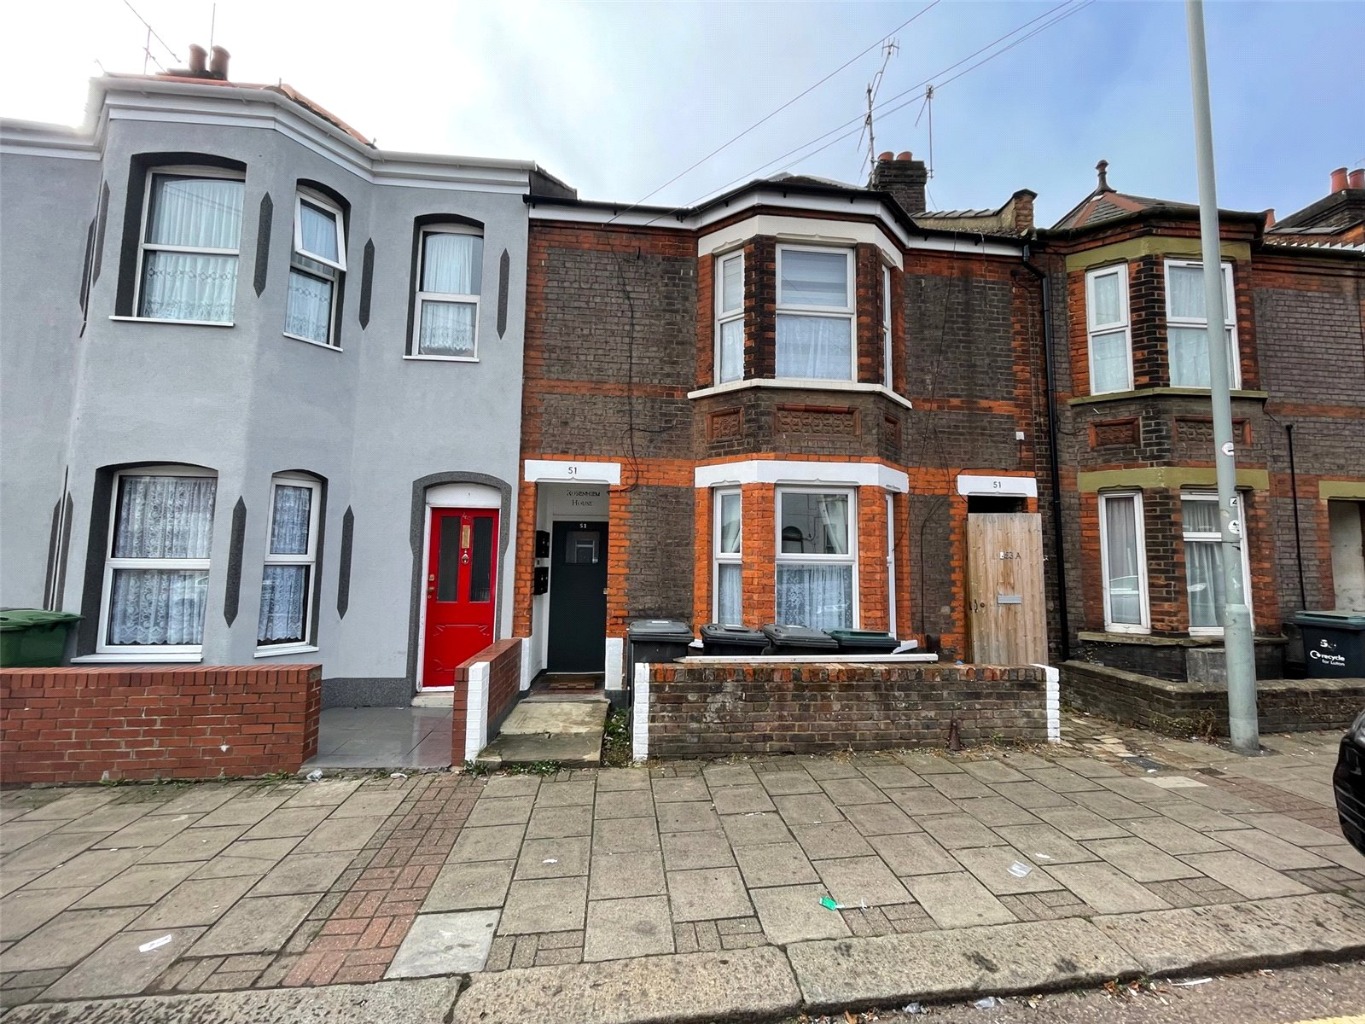 4 bed terraced house for sale in Luton, LU1 1HX - Property Image 1